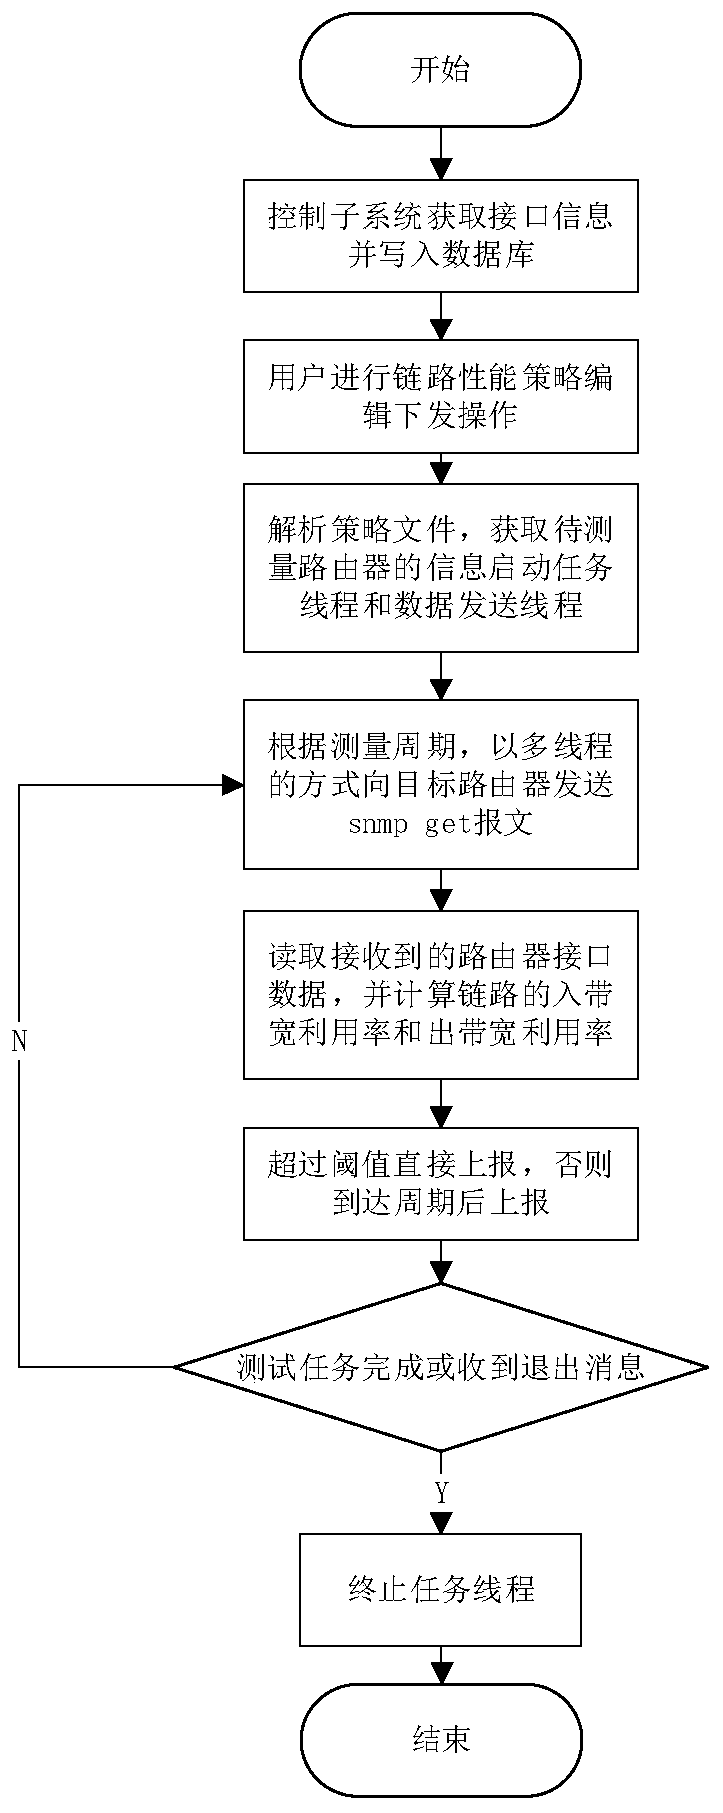 Large-scale network link performance measurement method and system based on SNMP